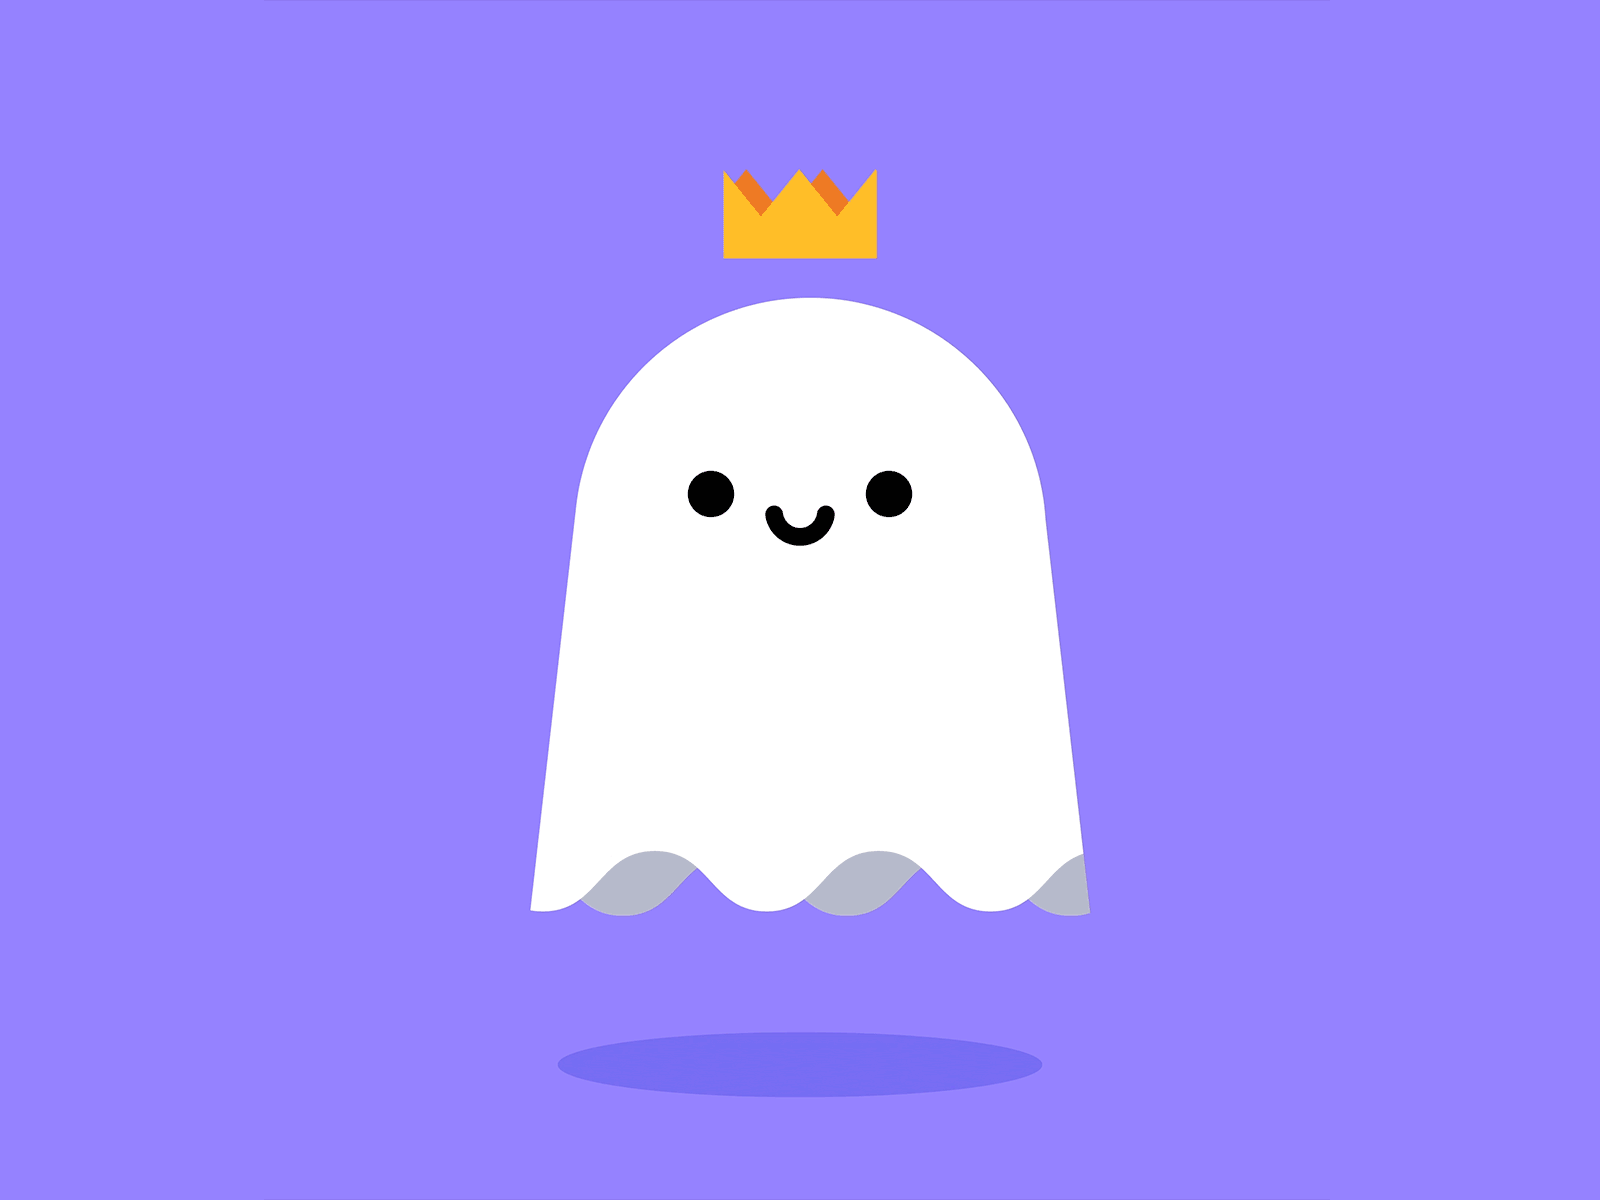 The Ghost King by Nathalie McClune on Dribbble